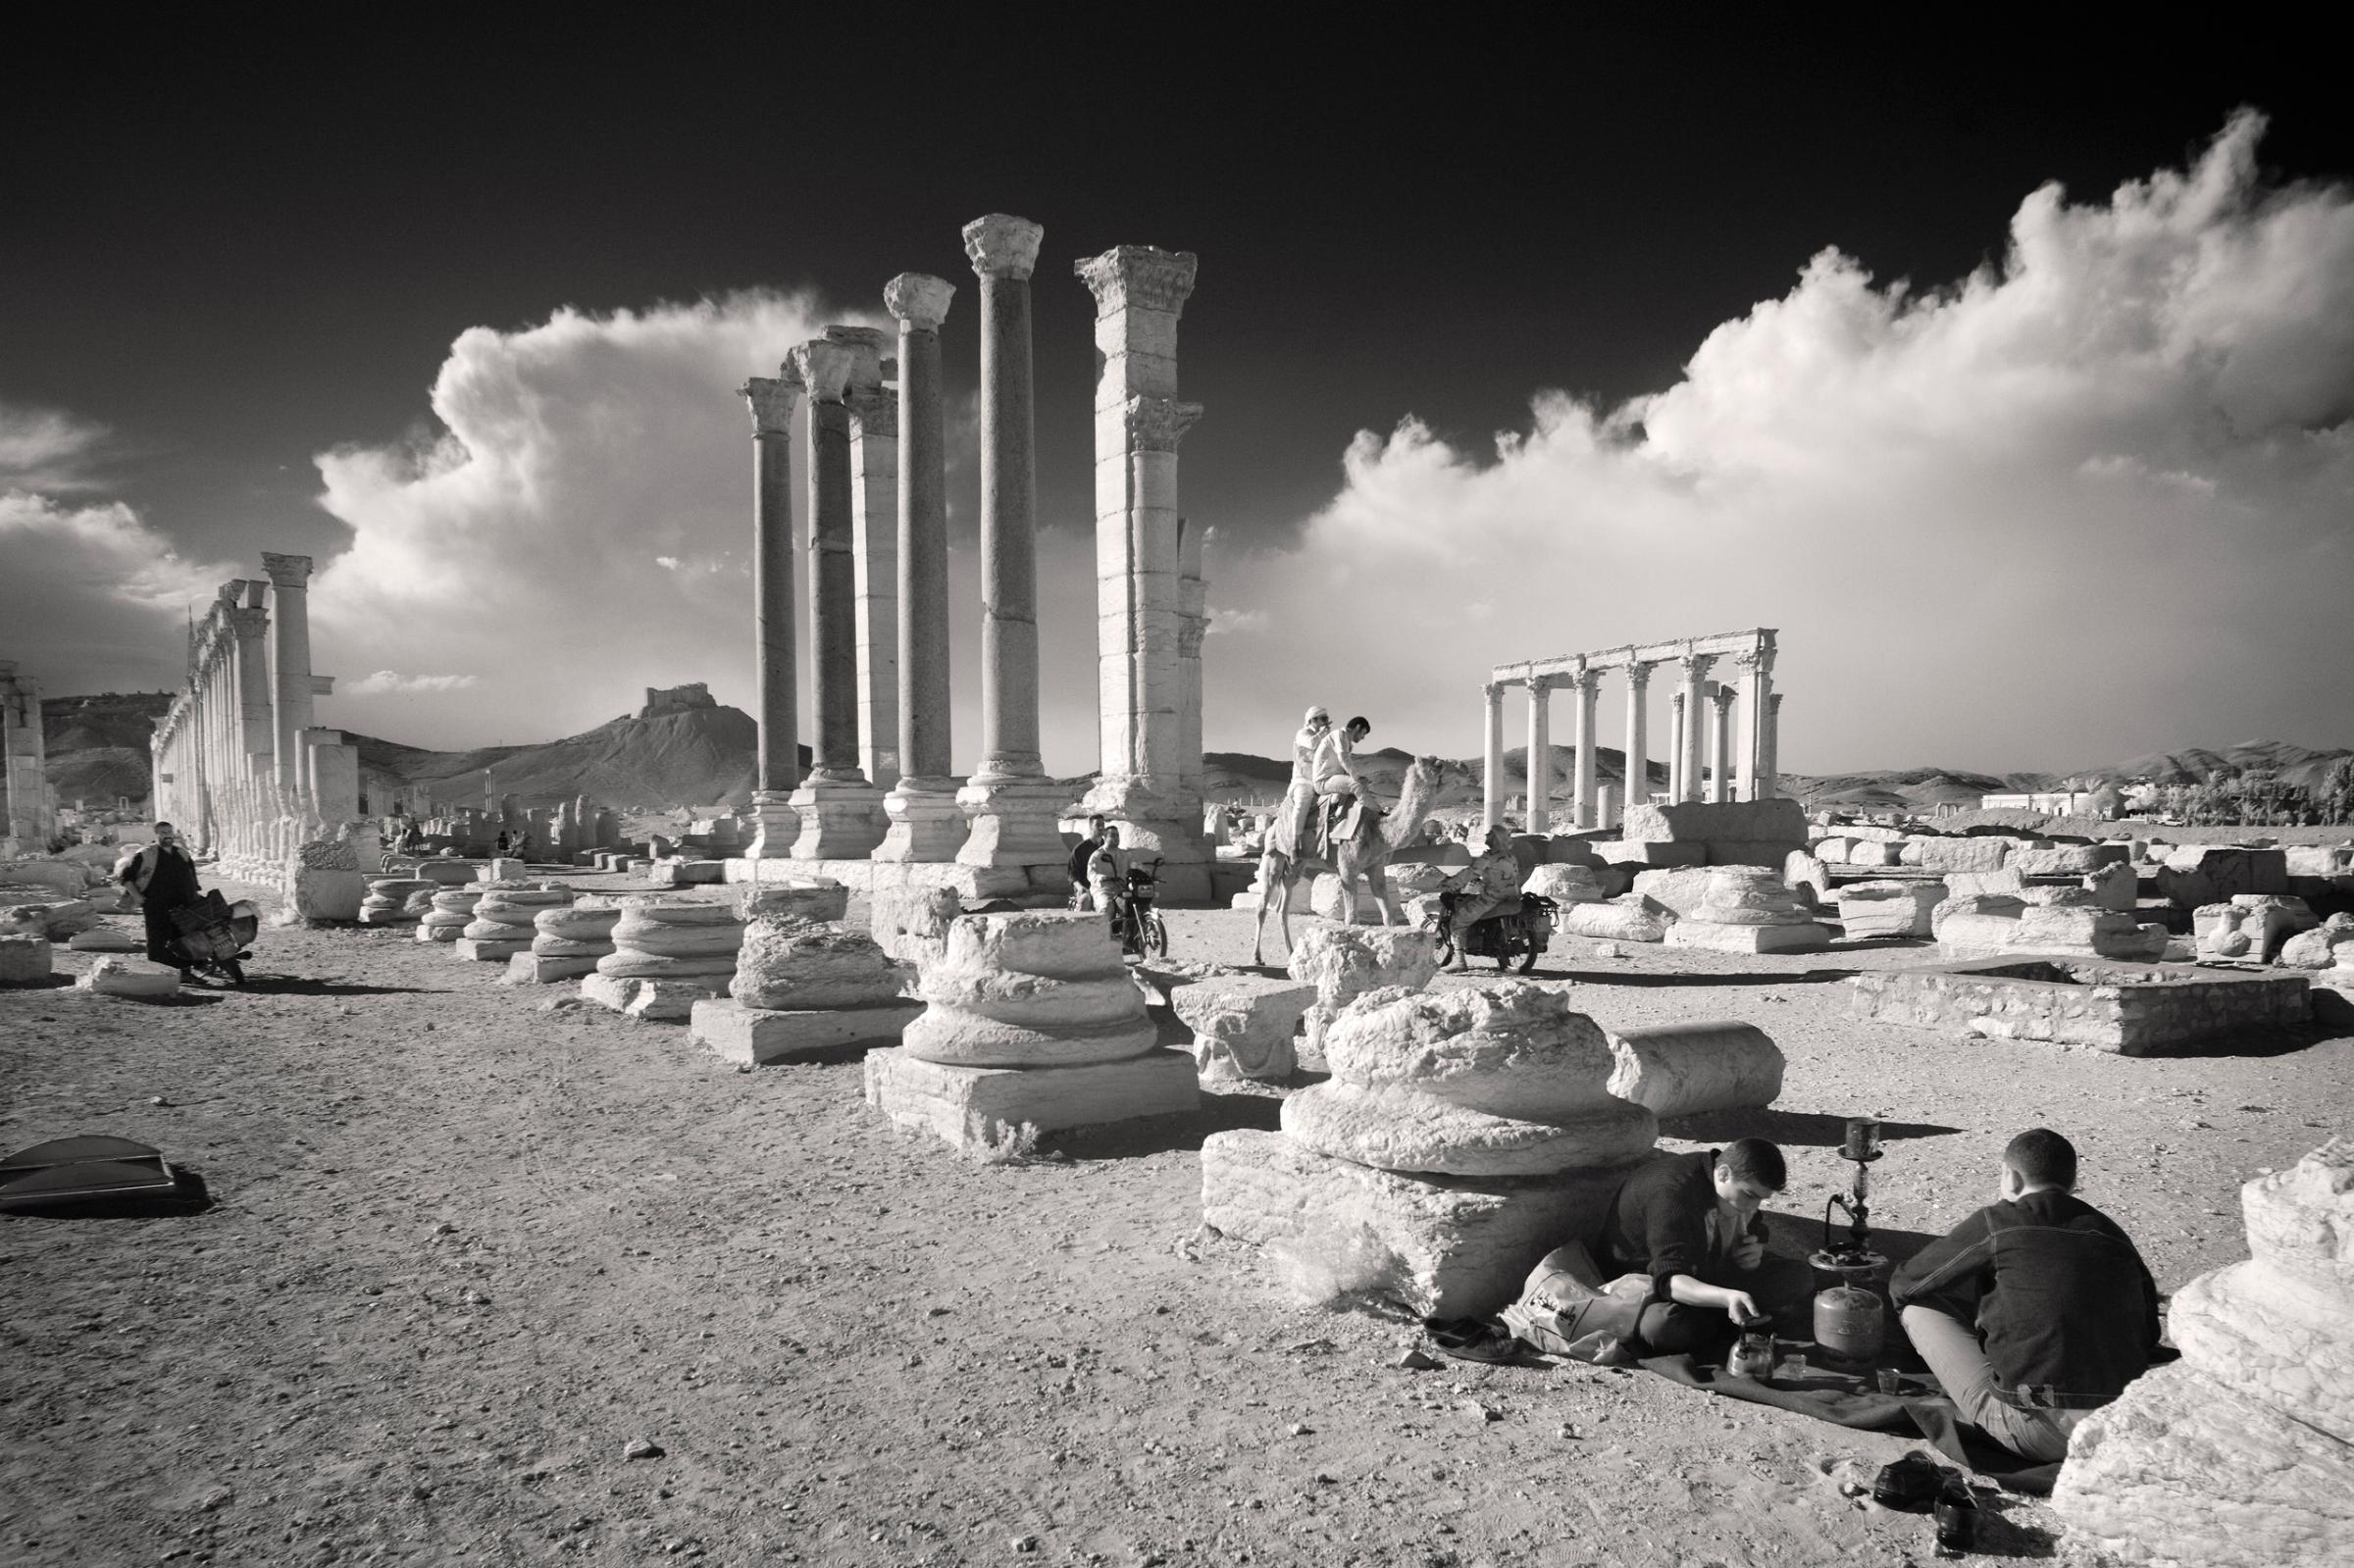 During the Muslim holy day of Friday, many locals picnic, stroll, ride horses, motorbikes among the ruins of Palmyra.